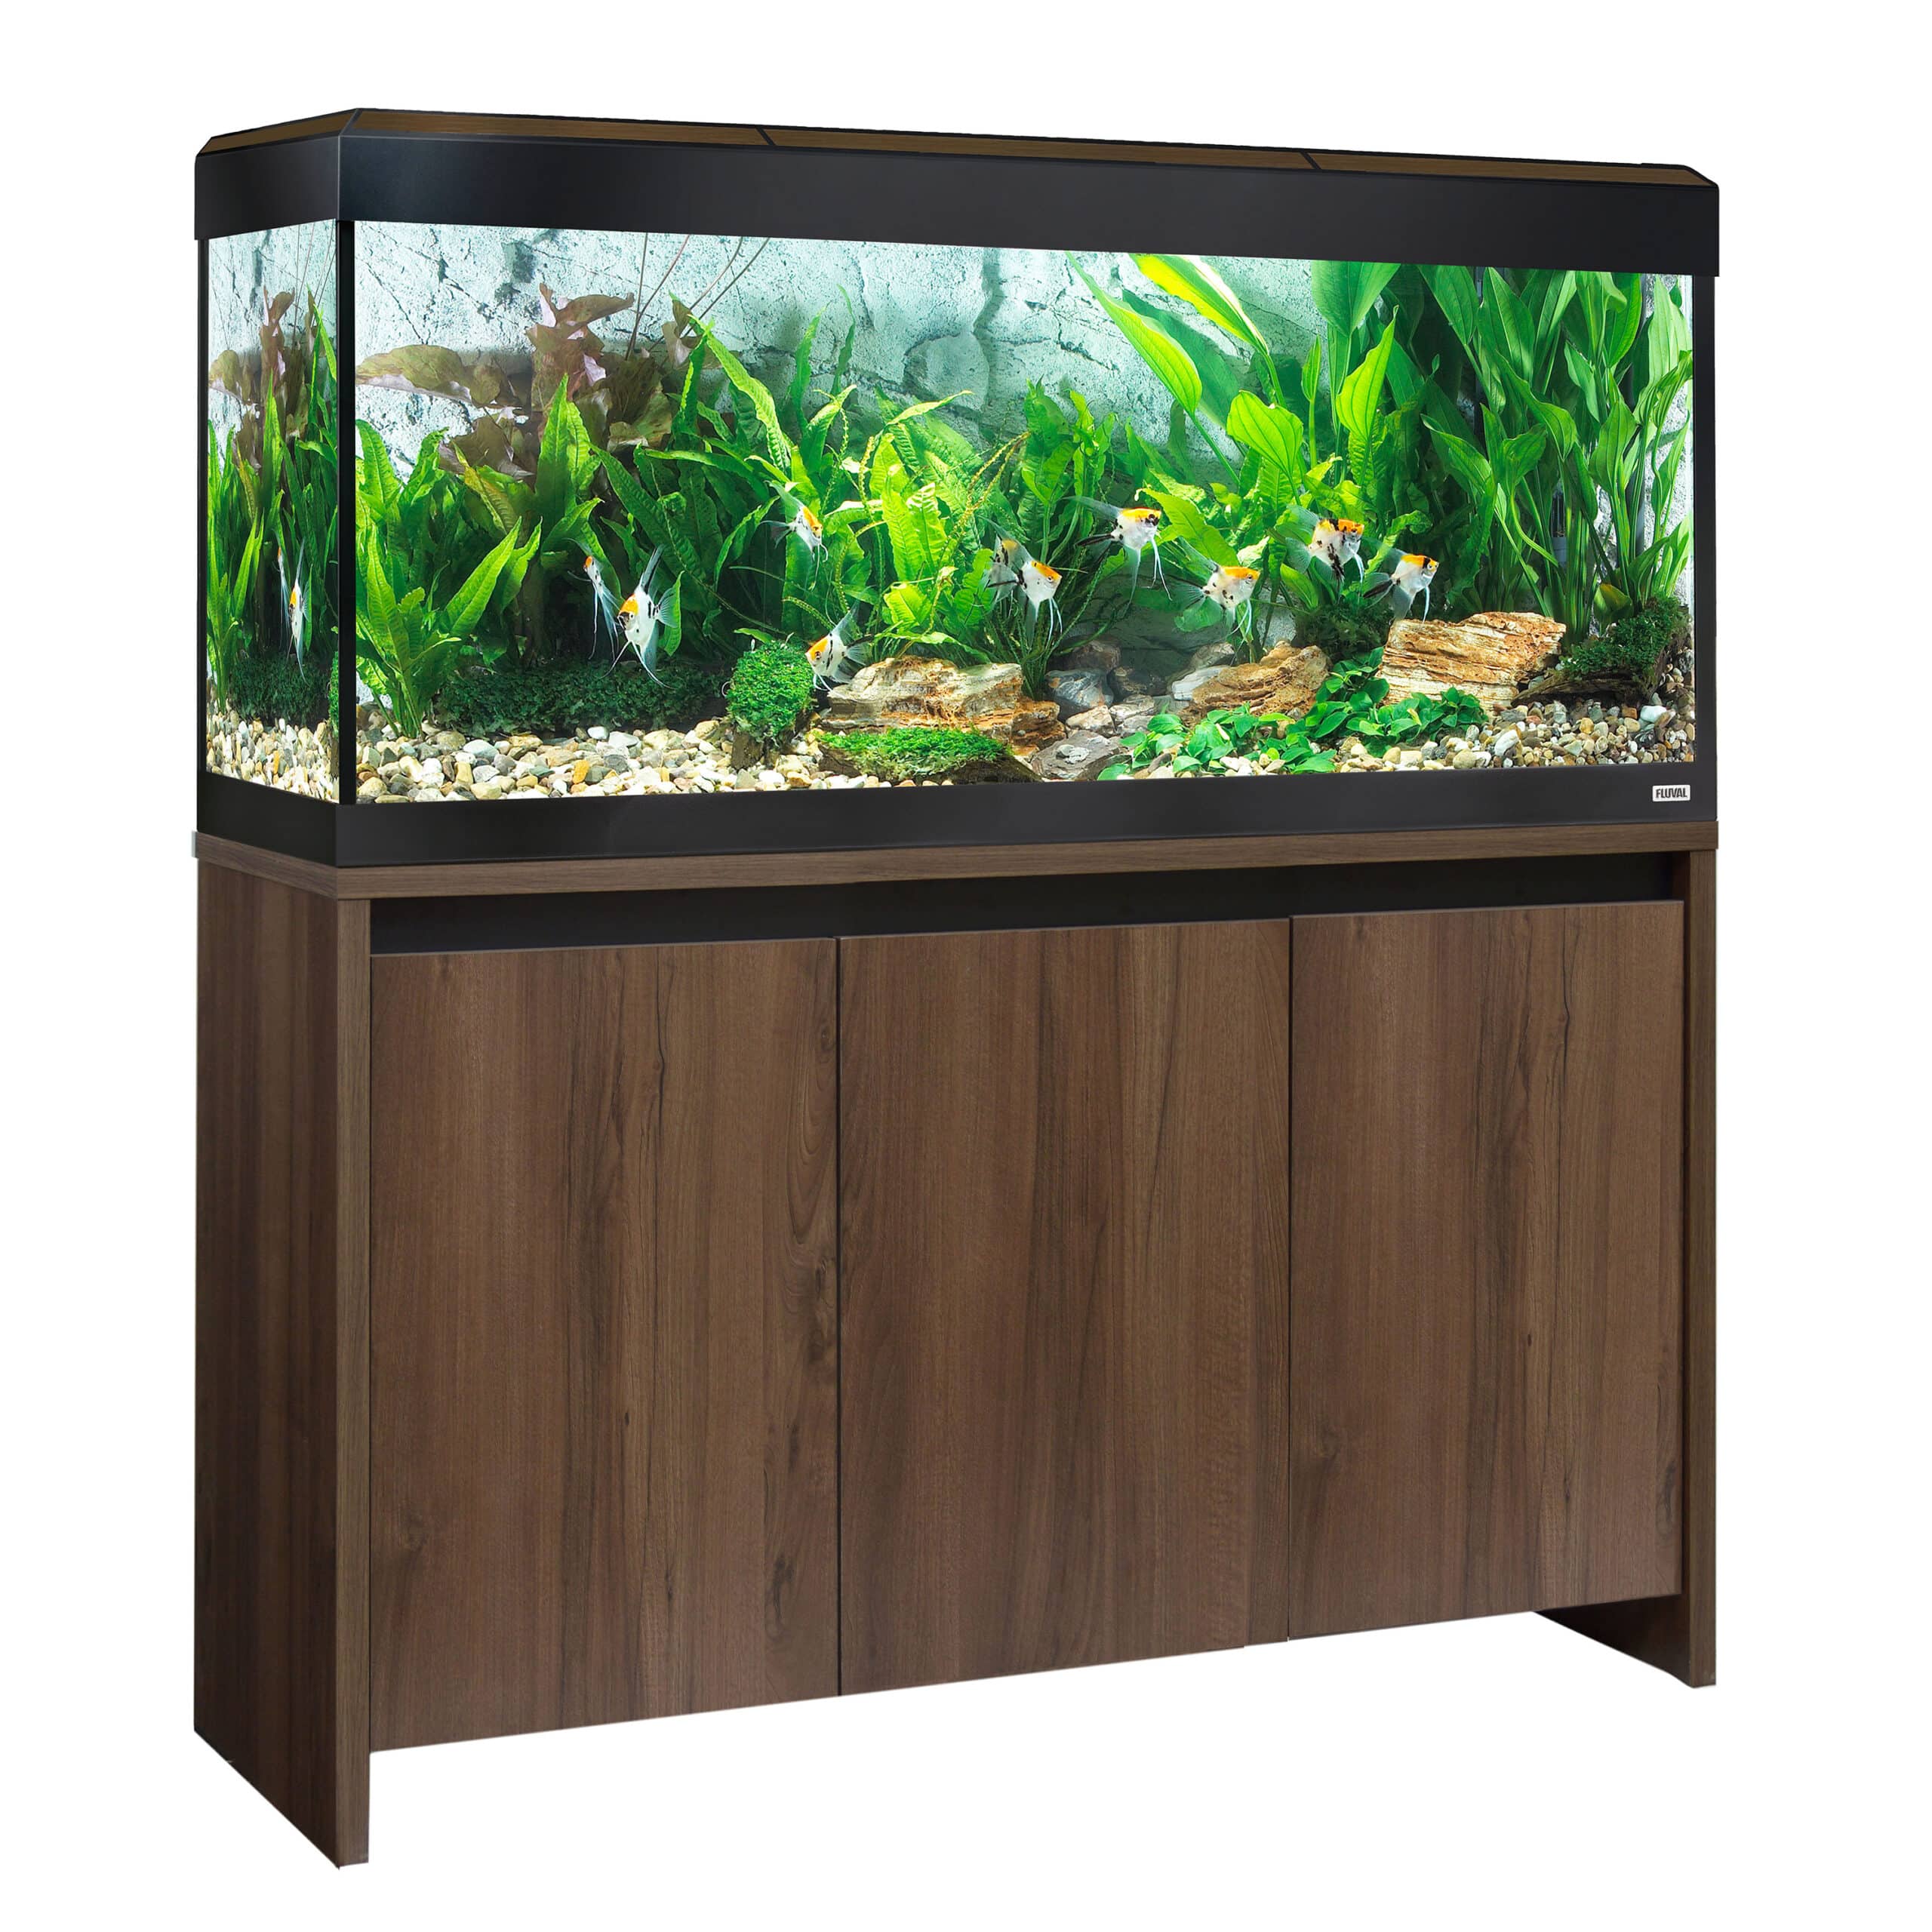 Fluval’s Roma designer aquarium range offers something for every type of Fishkeeper with its contemporary design and clean, simple lines. The full range of Roma aquariums are equipped with energy efficient Bluetooth LED lighting and comes complete with the essential equipment needed to set up your aquarium including a Fluval internal filter and heater.